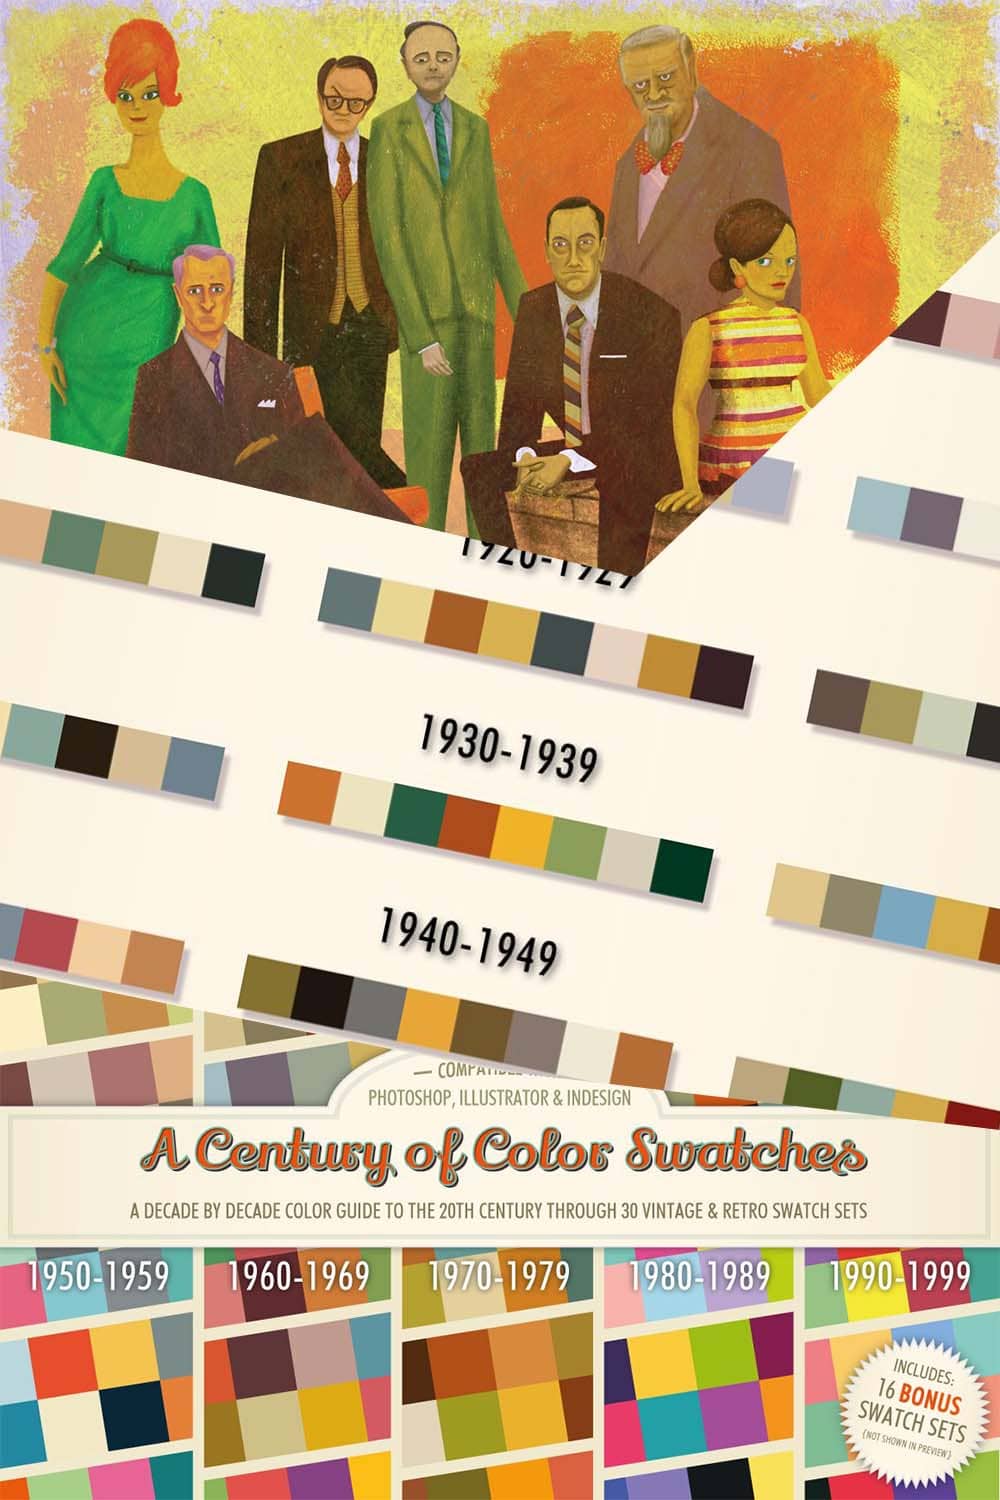 A Century of Color Swatches Pinterest image.